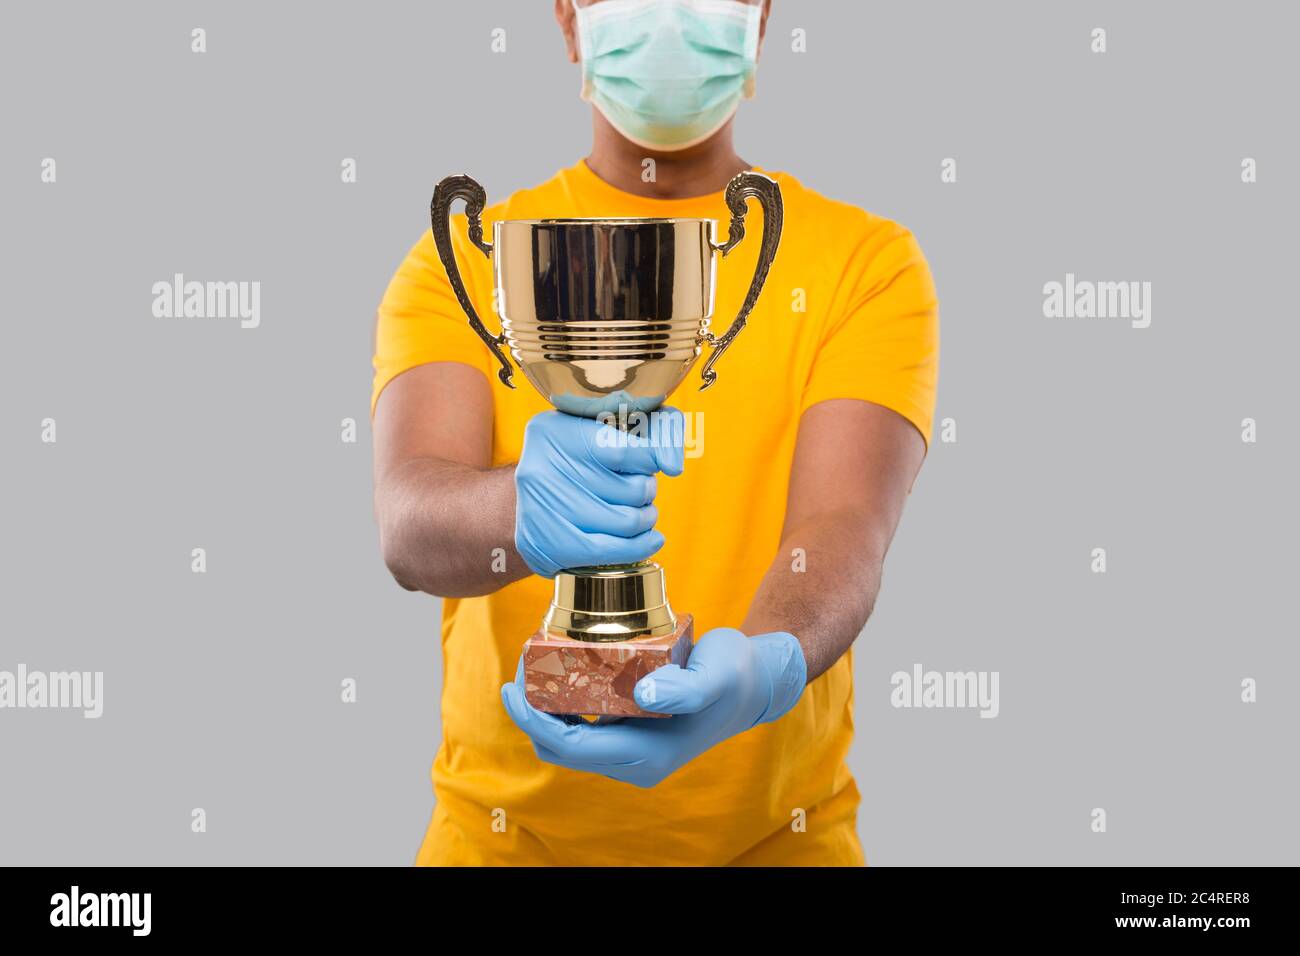 Indian Man Holding Trophy in Hands Wearing Medical Mask and Gloves Close Up Isolated Stock Photo